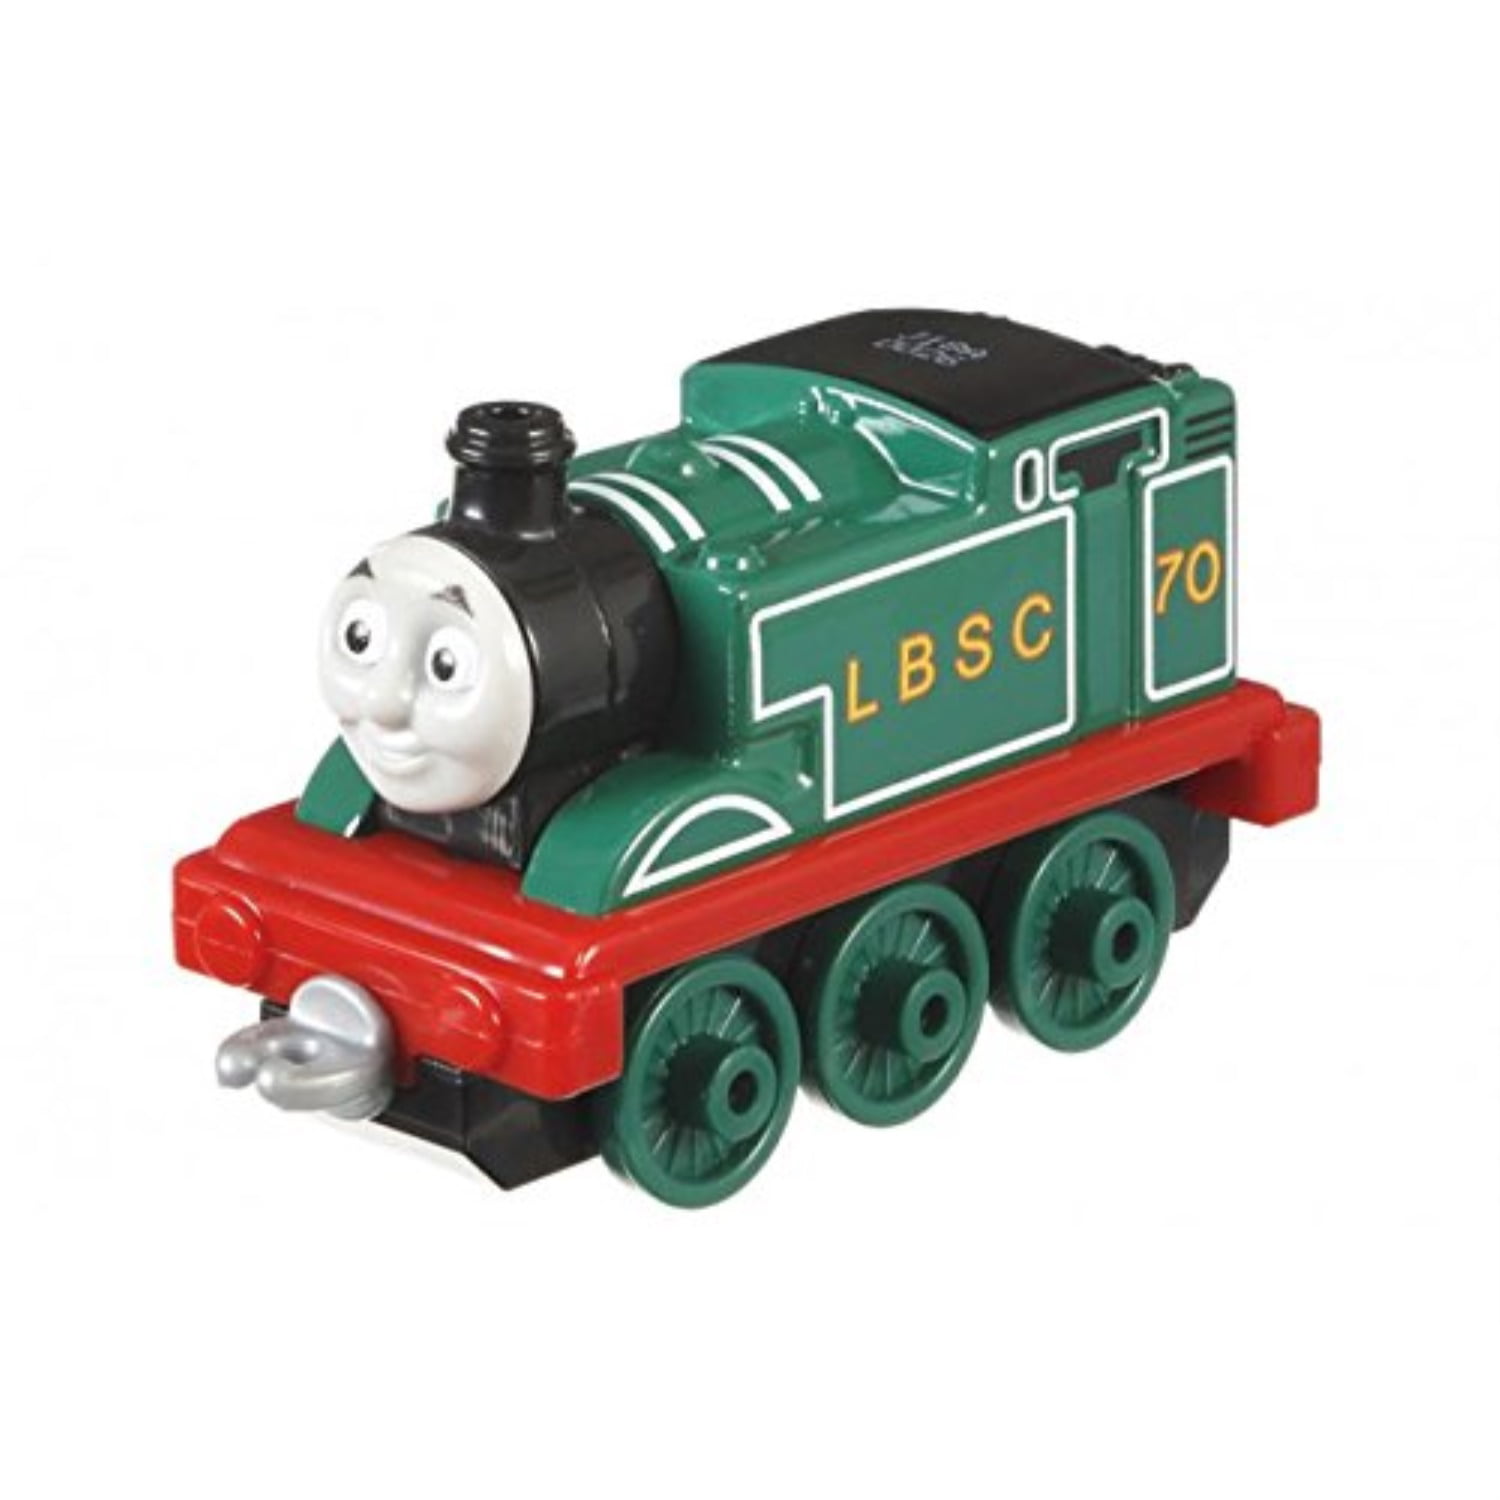 Thomas & Friends 900 DVT09 Adventures Special Edition Original Engine Toy Green for sale online 